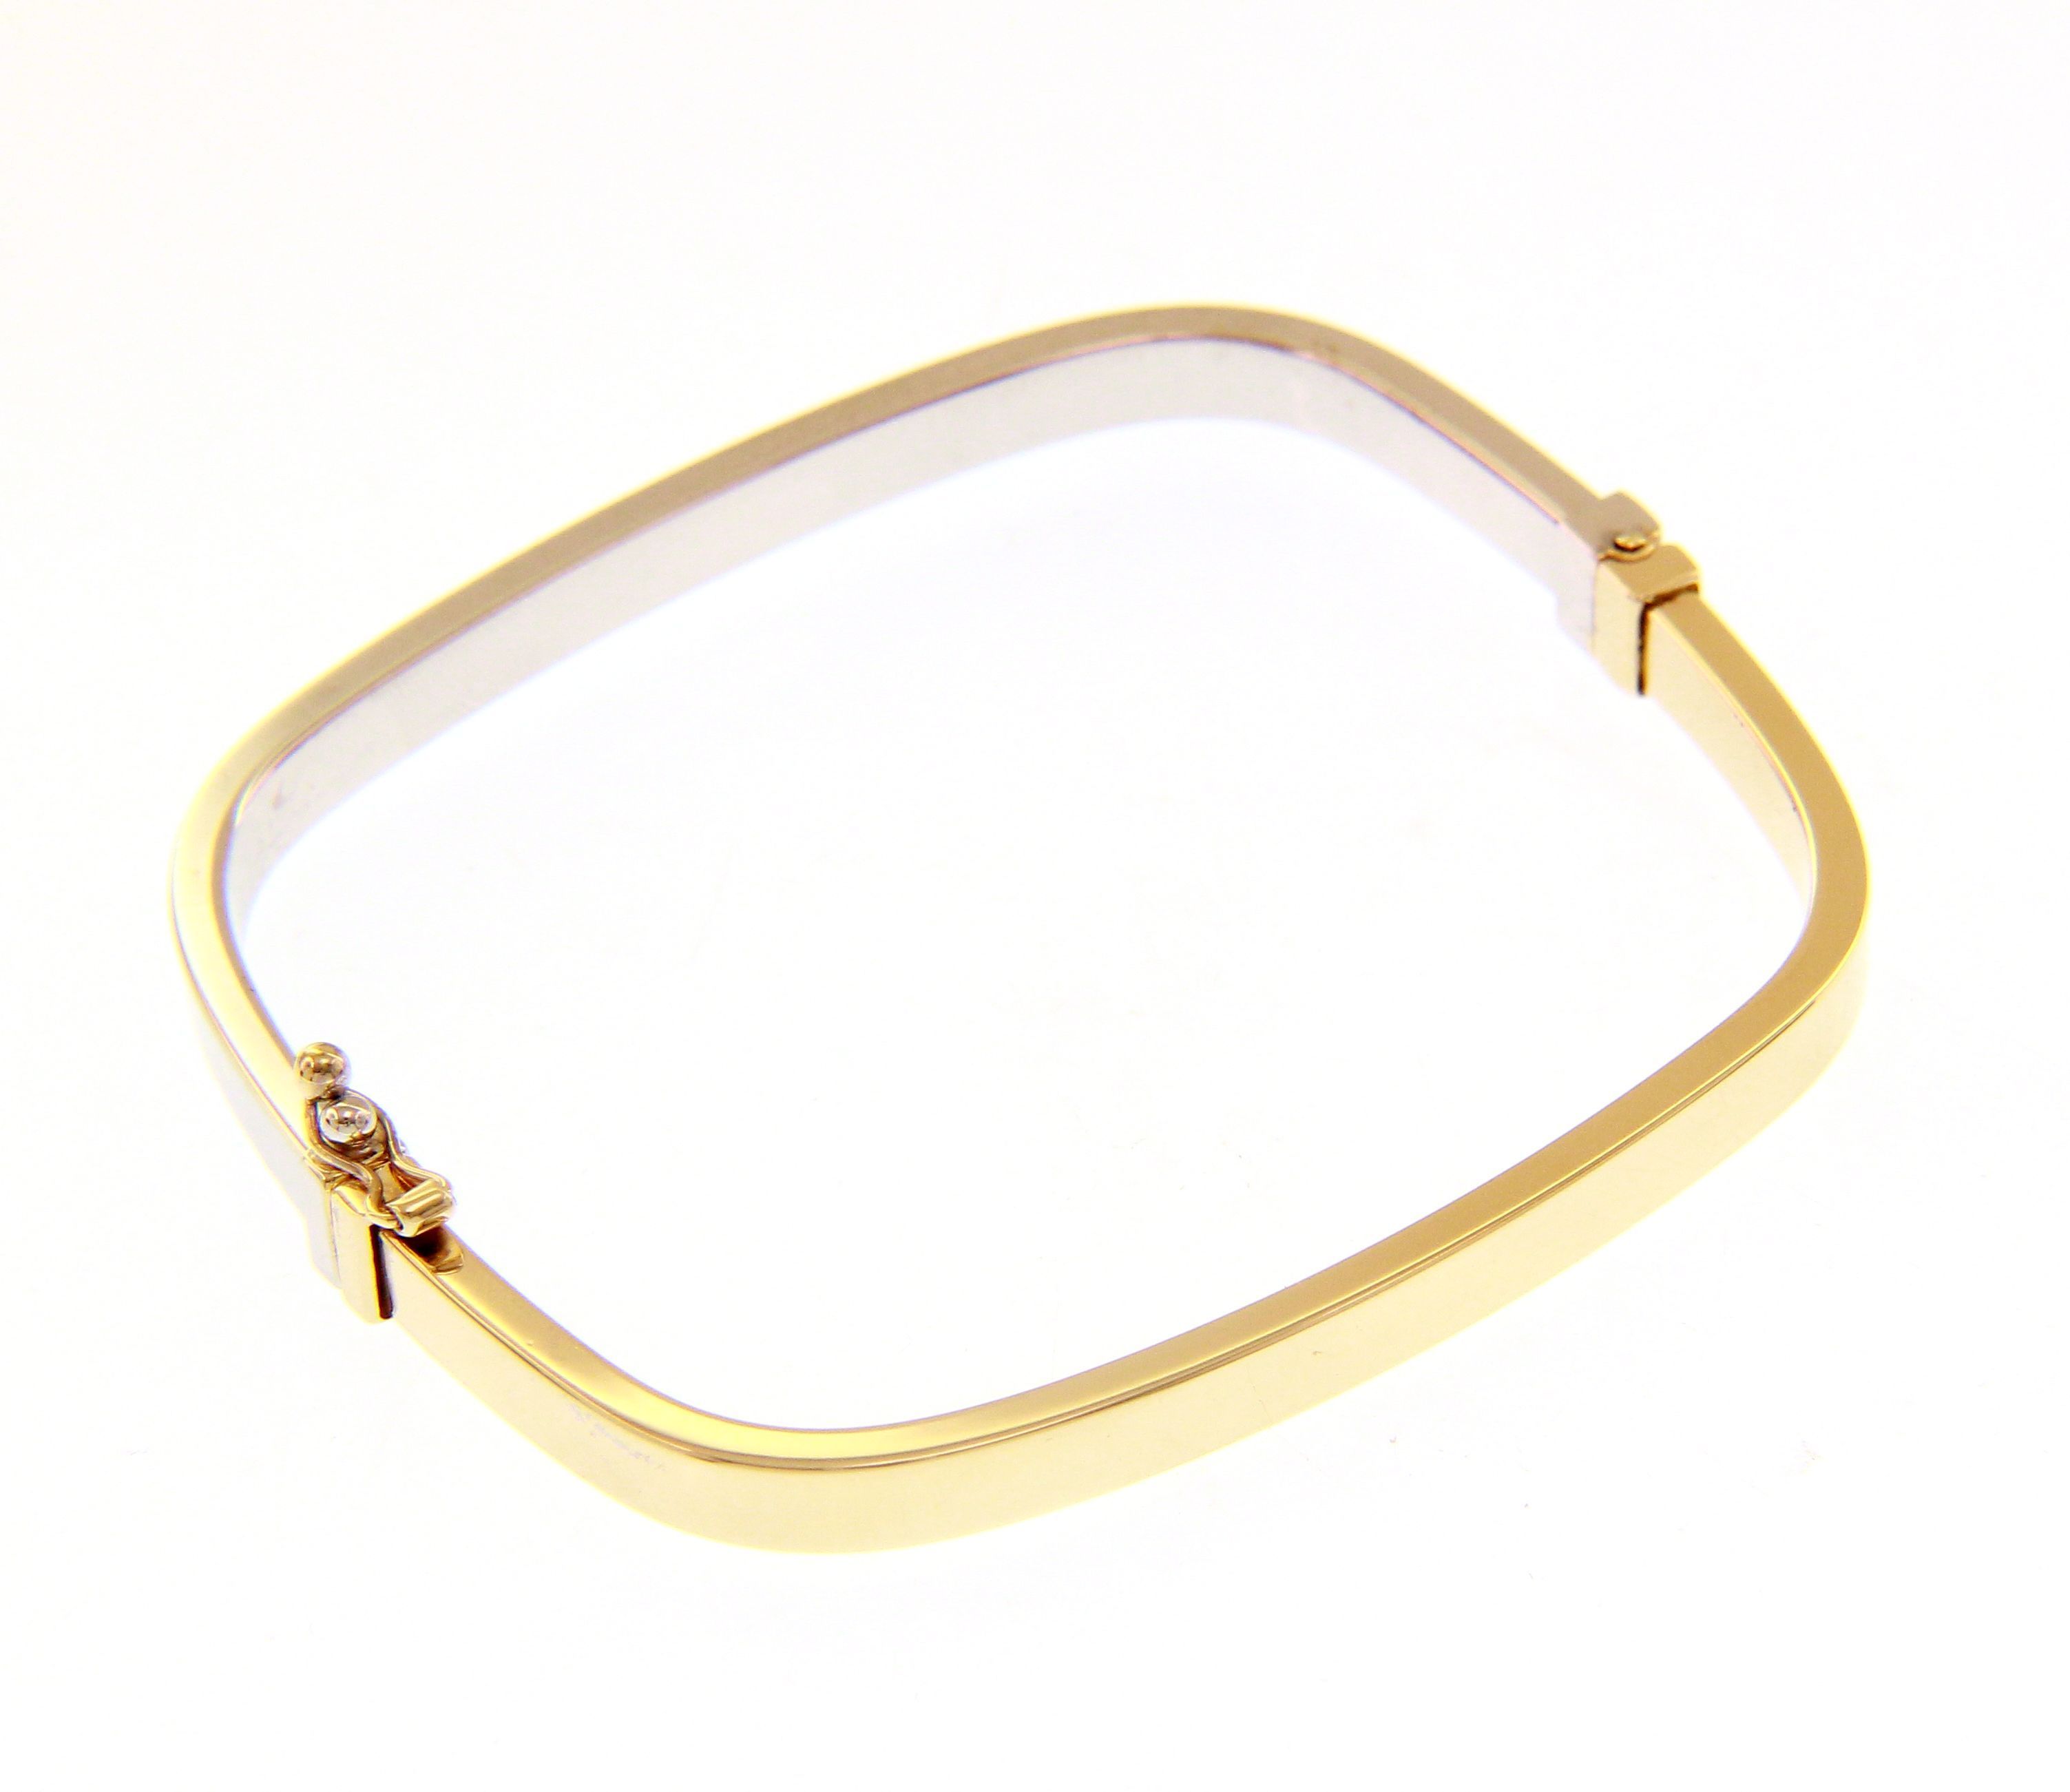 Gold and white gold parallelogram bracelet with clasp k14 (code S219999)